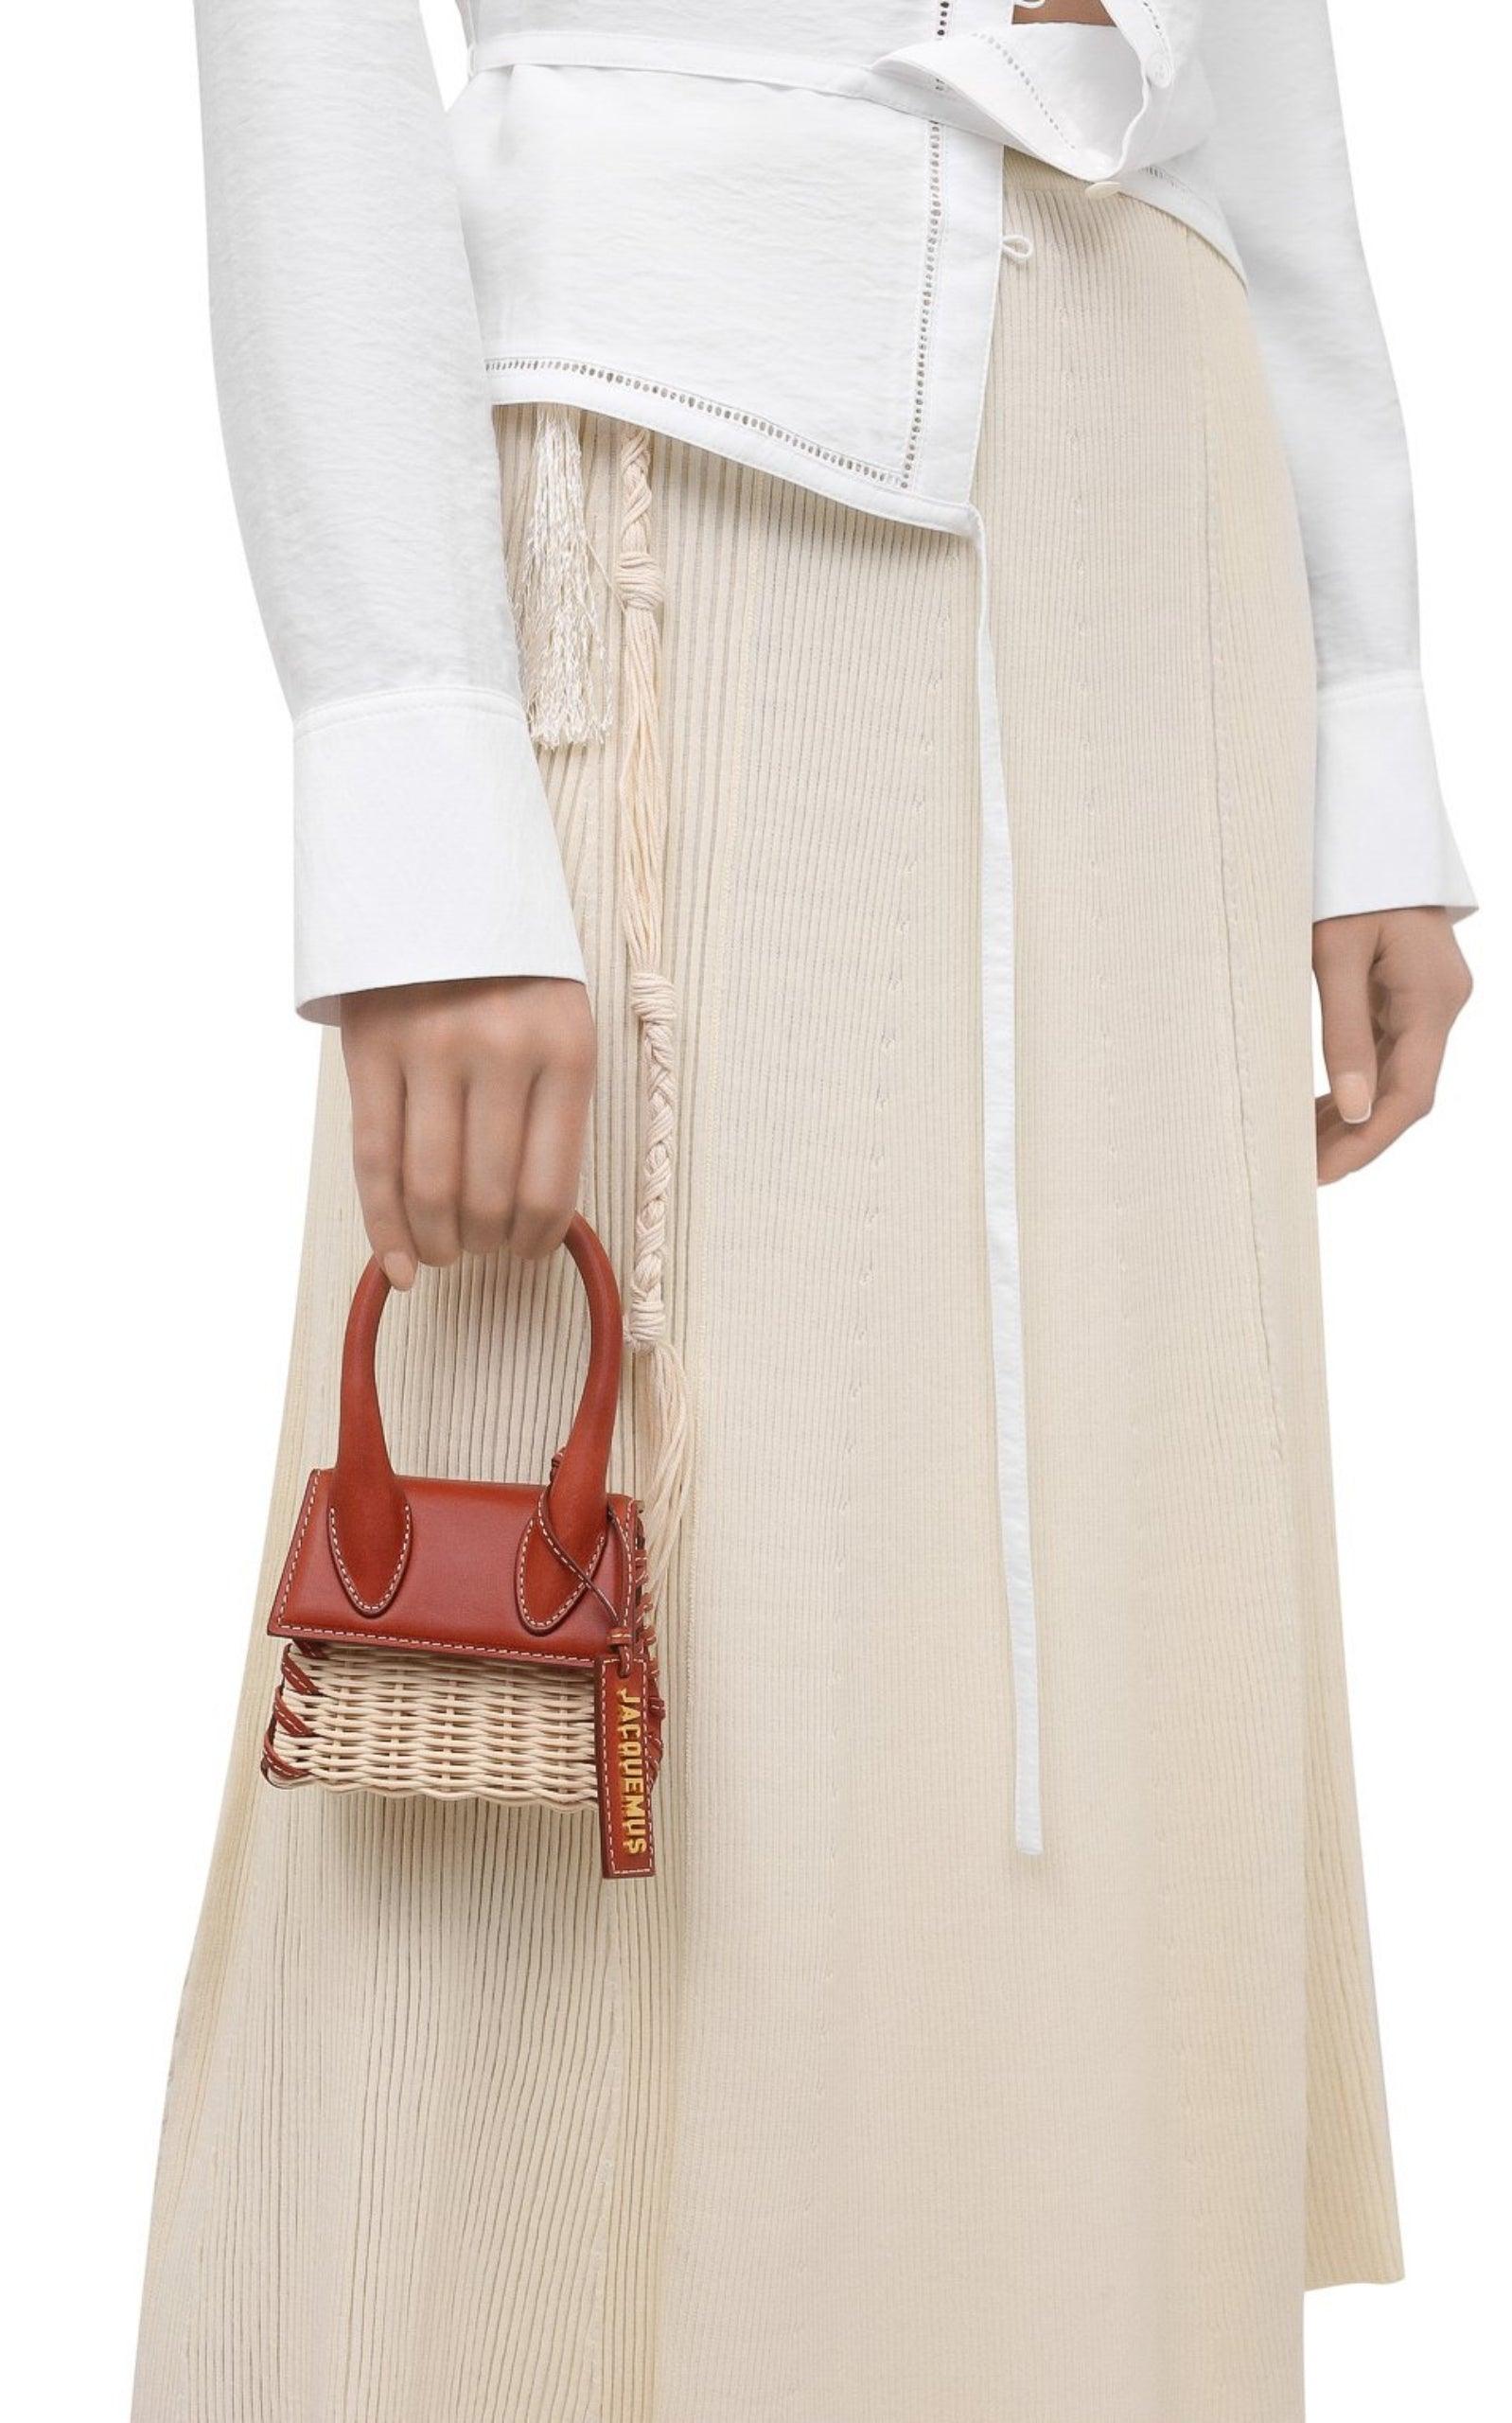 Jacquemus Leather and Rattan Chiquito Mini-Bag in Brown